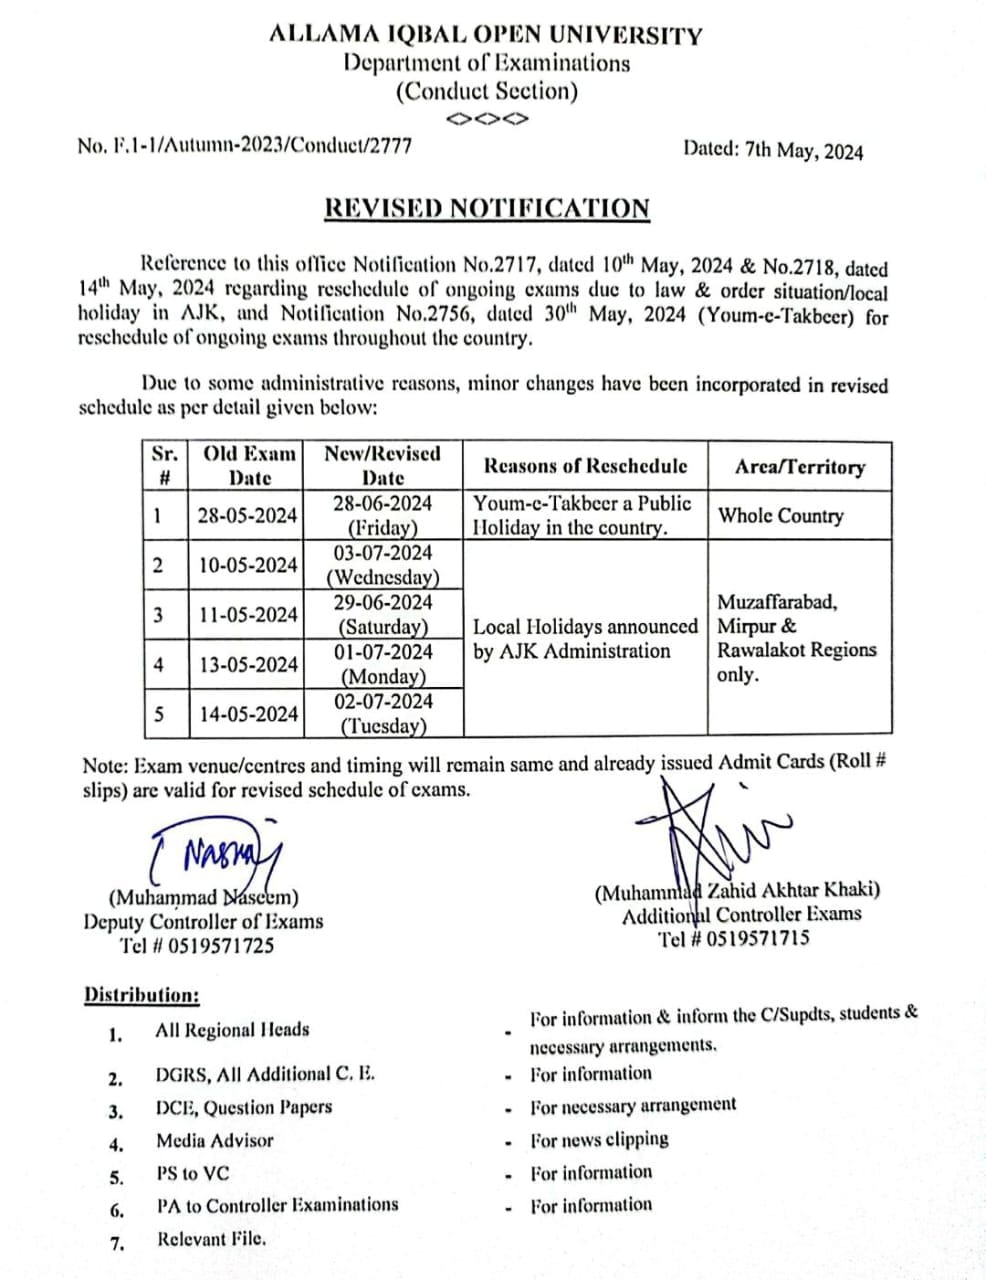 Revised Schedule of AIOU Exams 2024